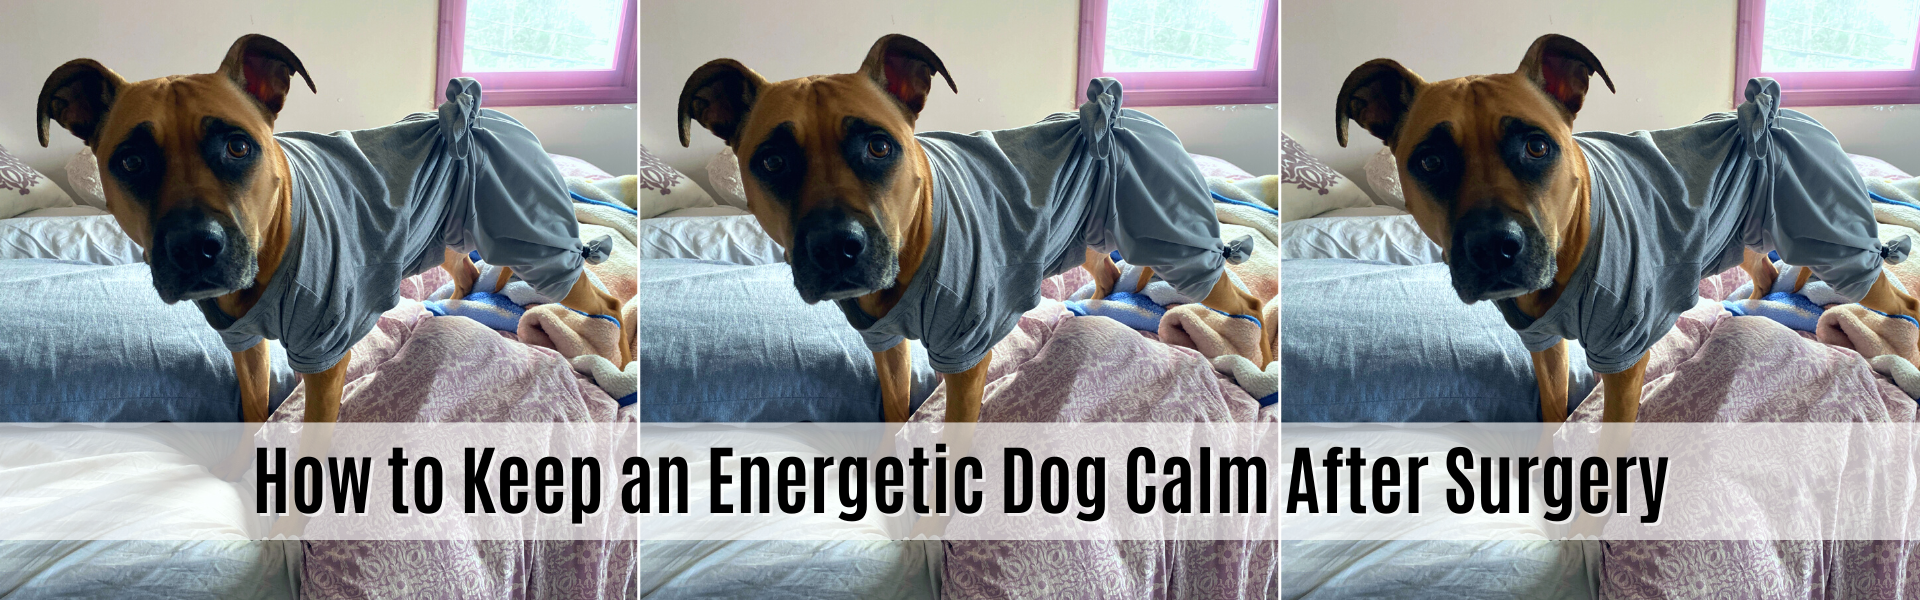 How to Keep an Energetic Dog Calm After Surgery